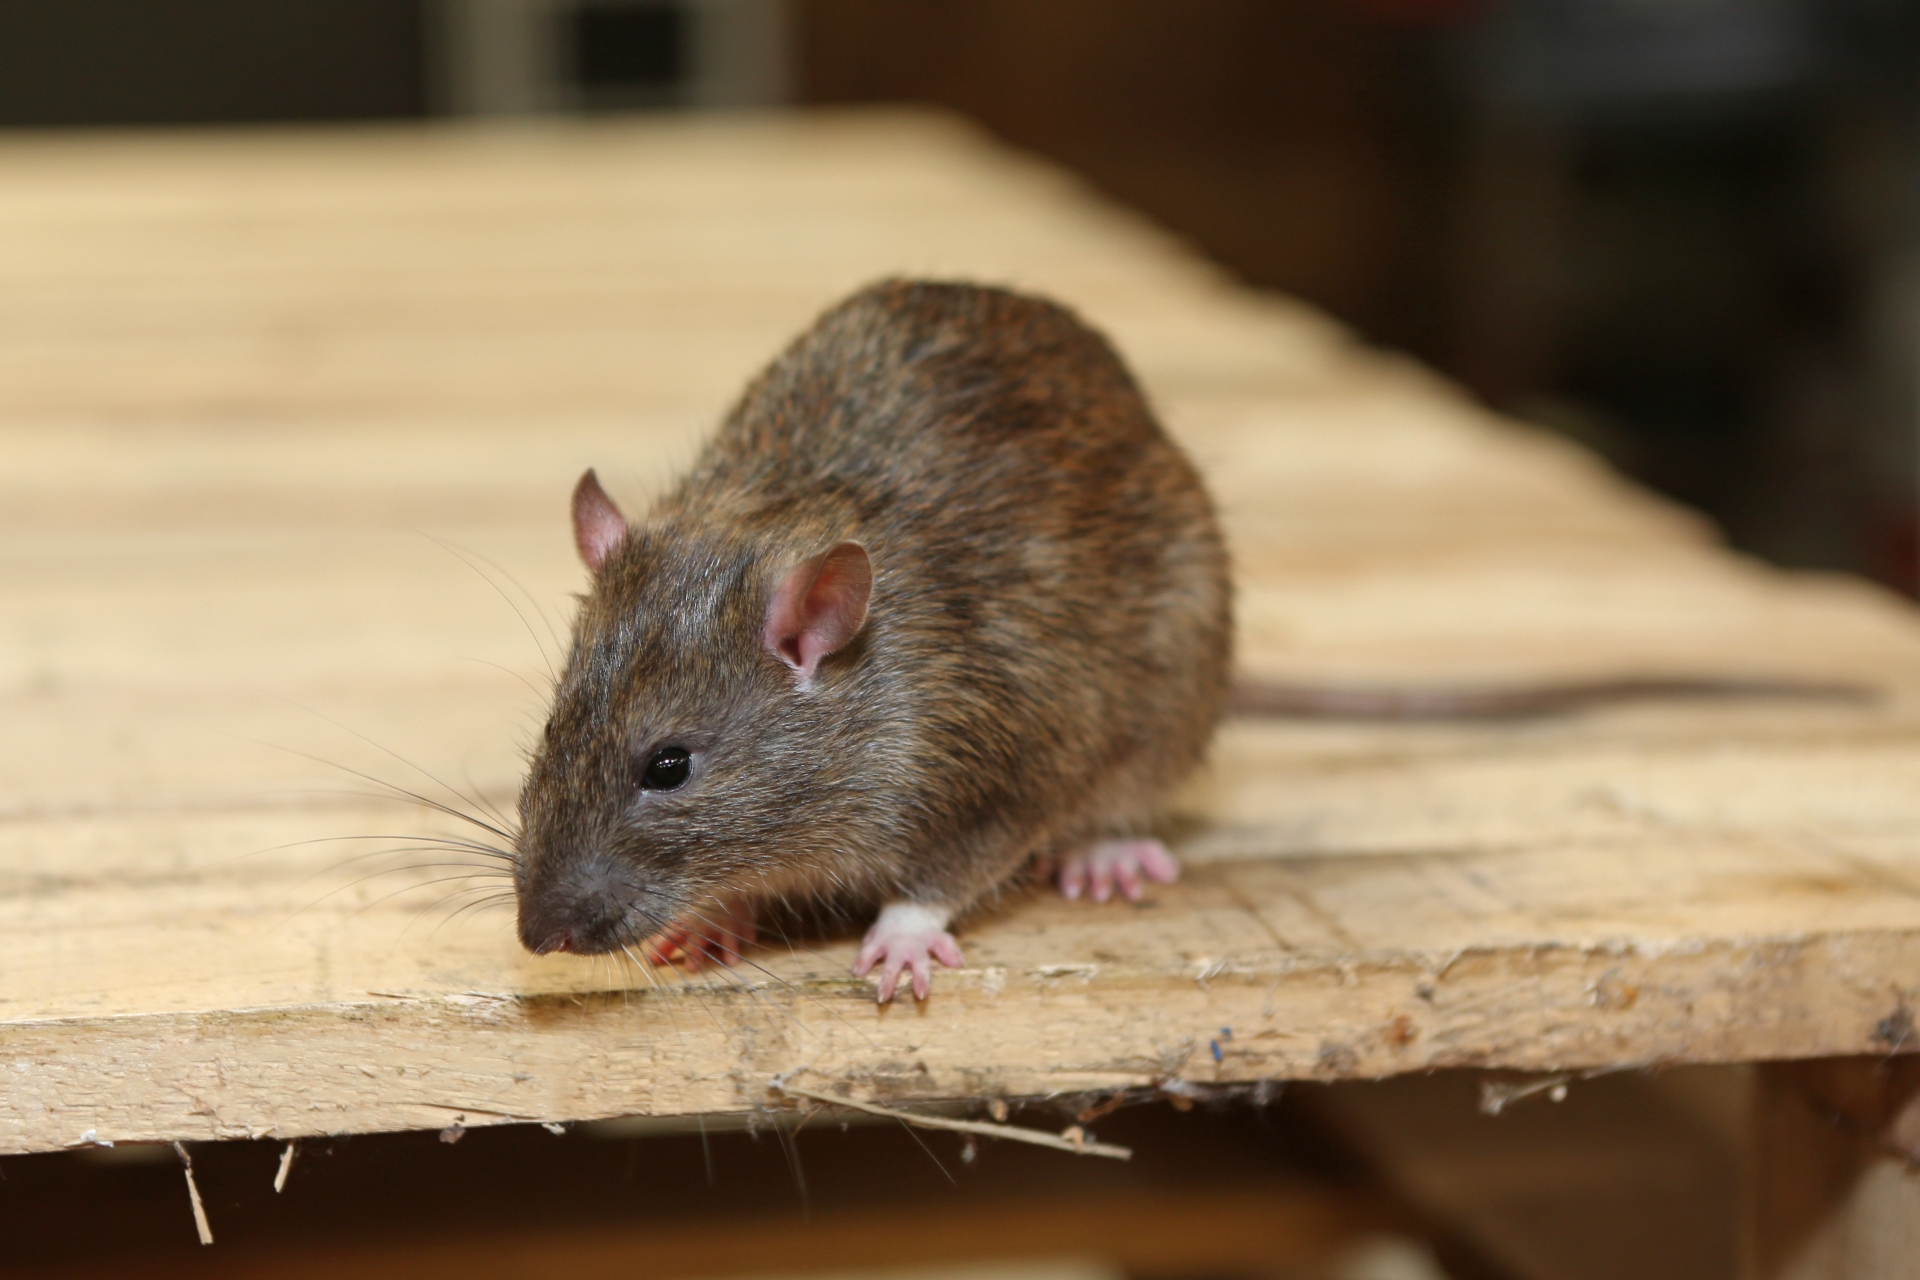 Rat extermination, Pest Control in Finsbury Park, Manor House, N4. Call Now 020 8166 9746